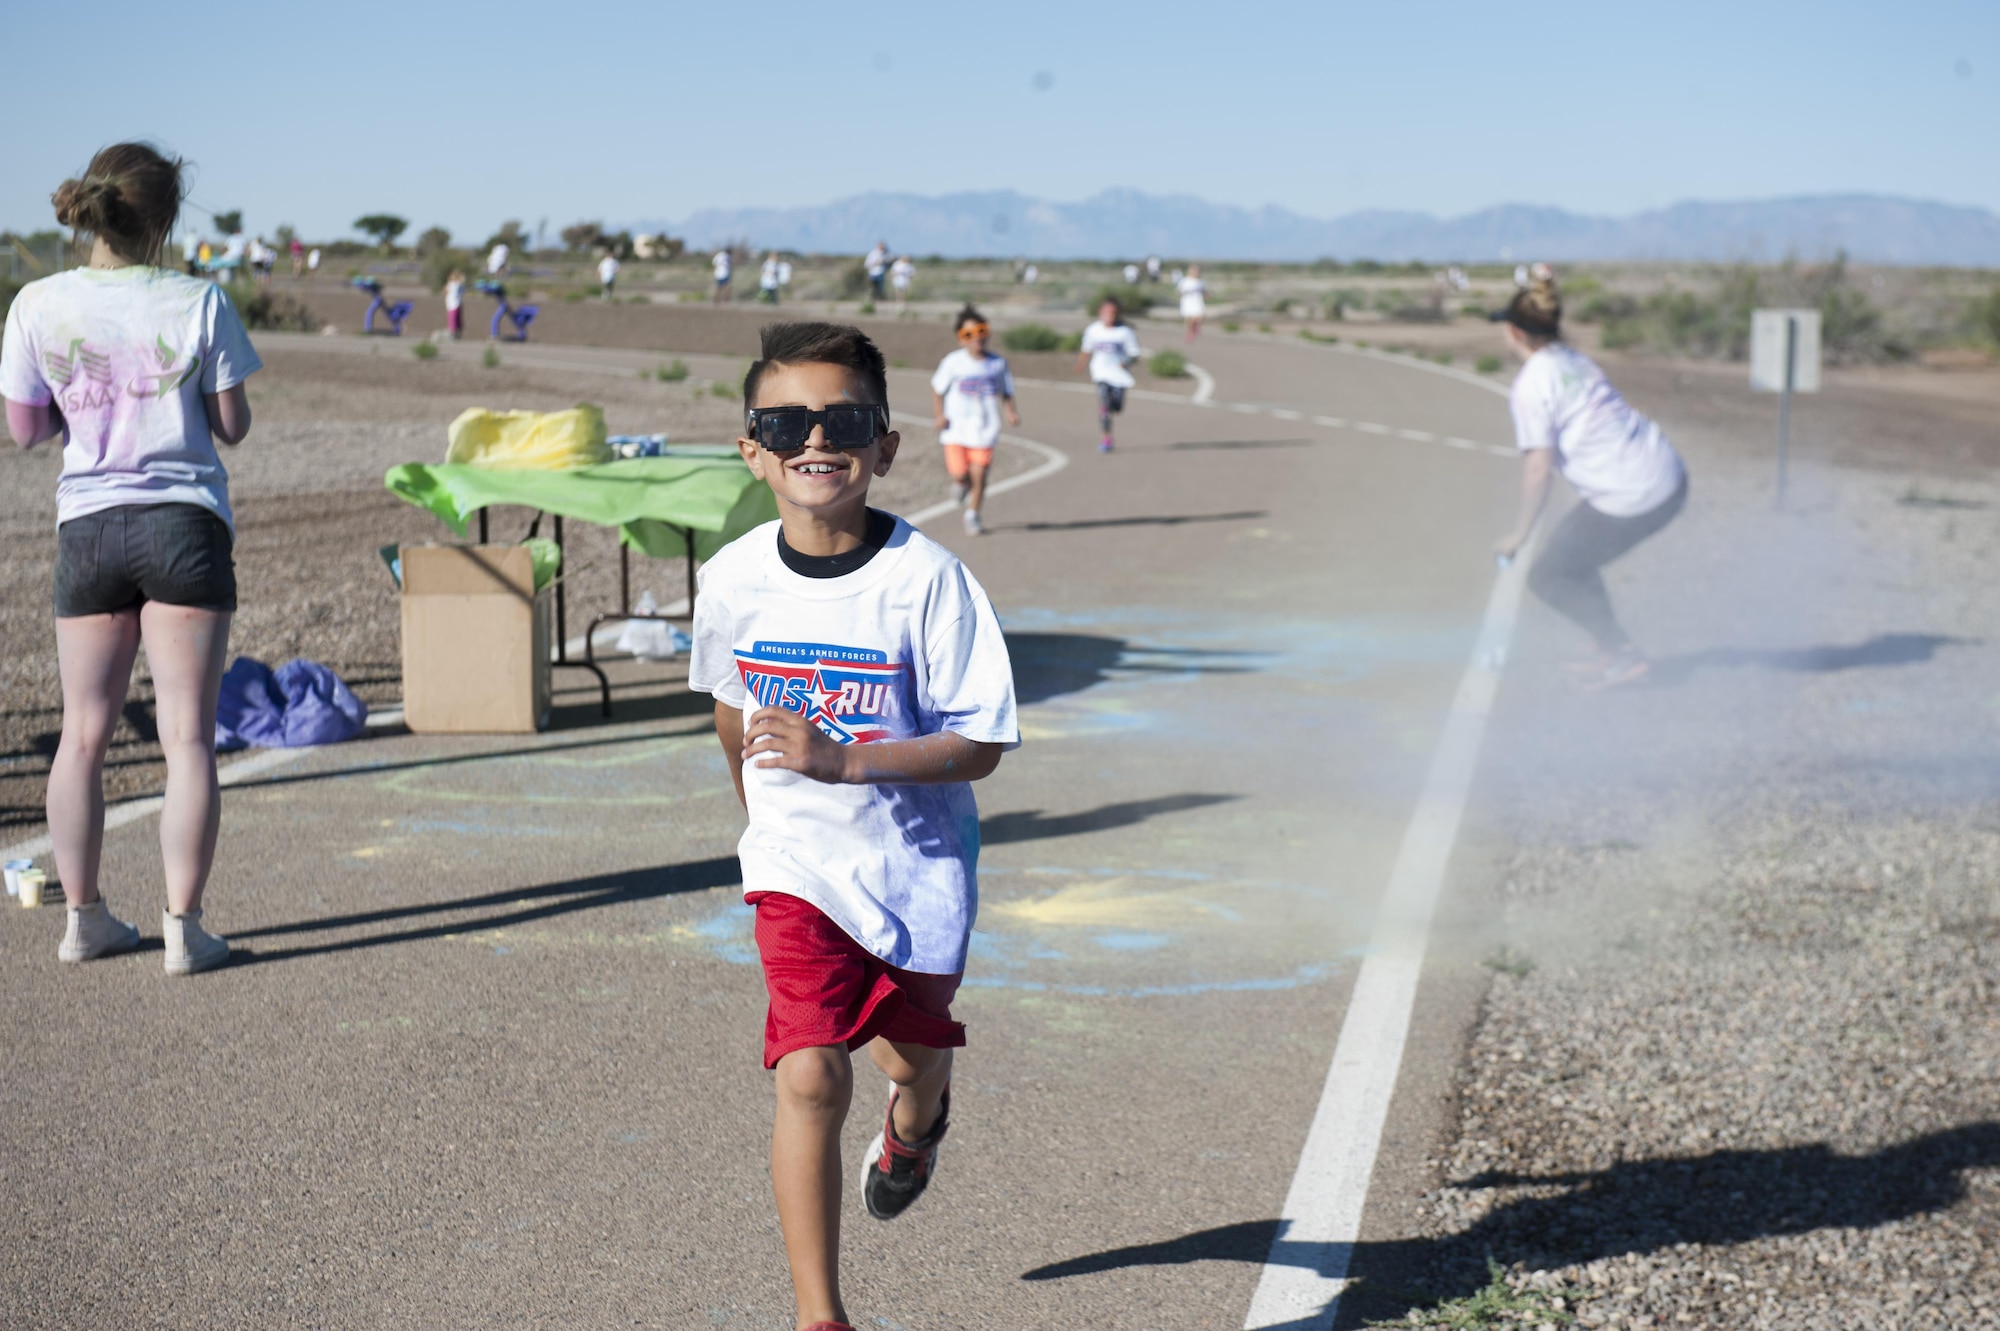 The Youth and Teen Center hosted the Art Blast color run 5K and the America’s Armed Forces Kids fun run at Holloman Air Force Base, N.M on May 20, 2017. During the run, younger children run a half mile, seven and eight year olds run one mile, and the older children run two miles. (U.S. Air Force photo by Airman 1st Class Ilyana A. Escalona)